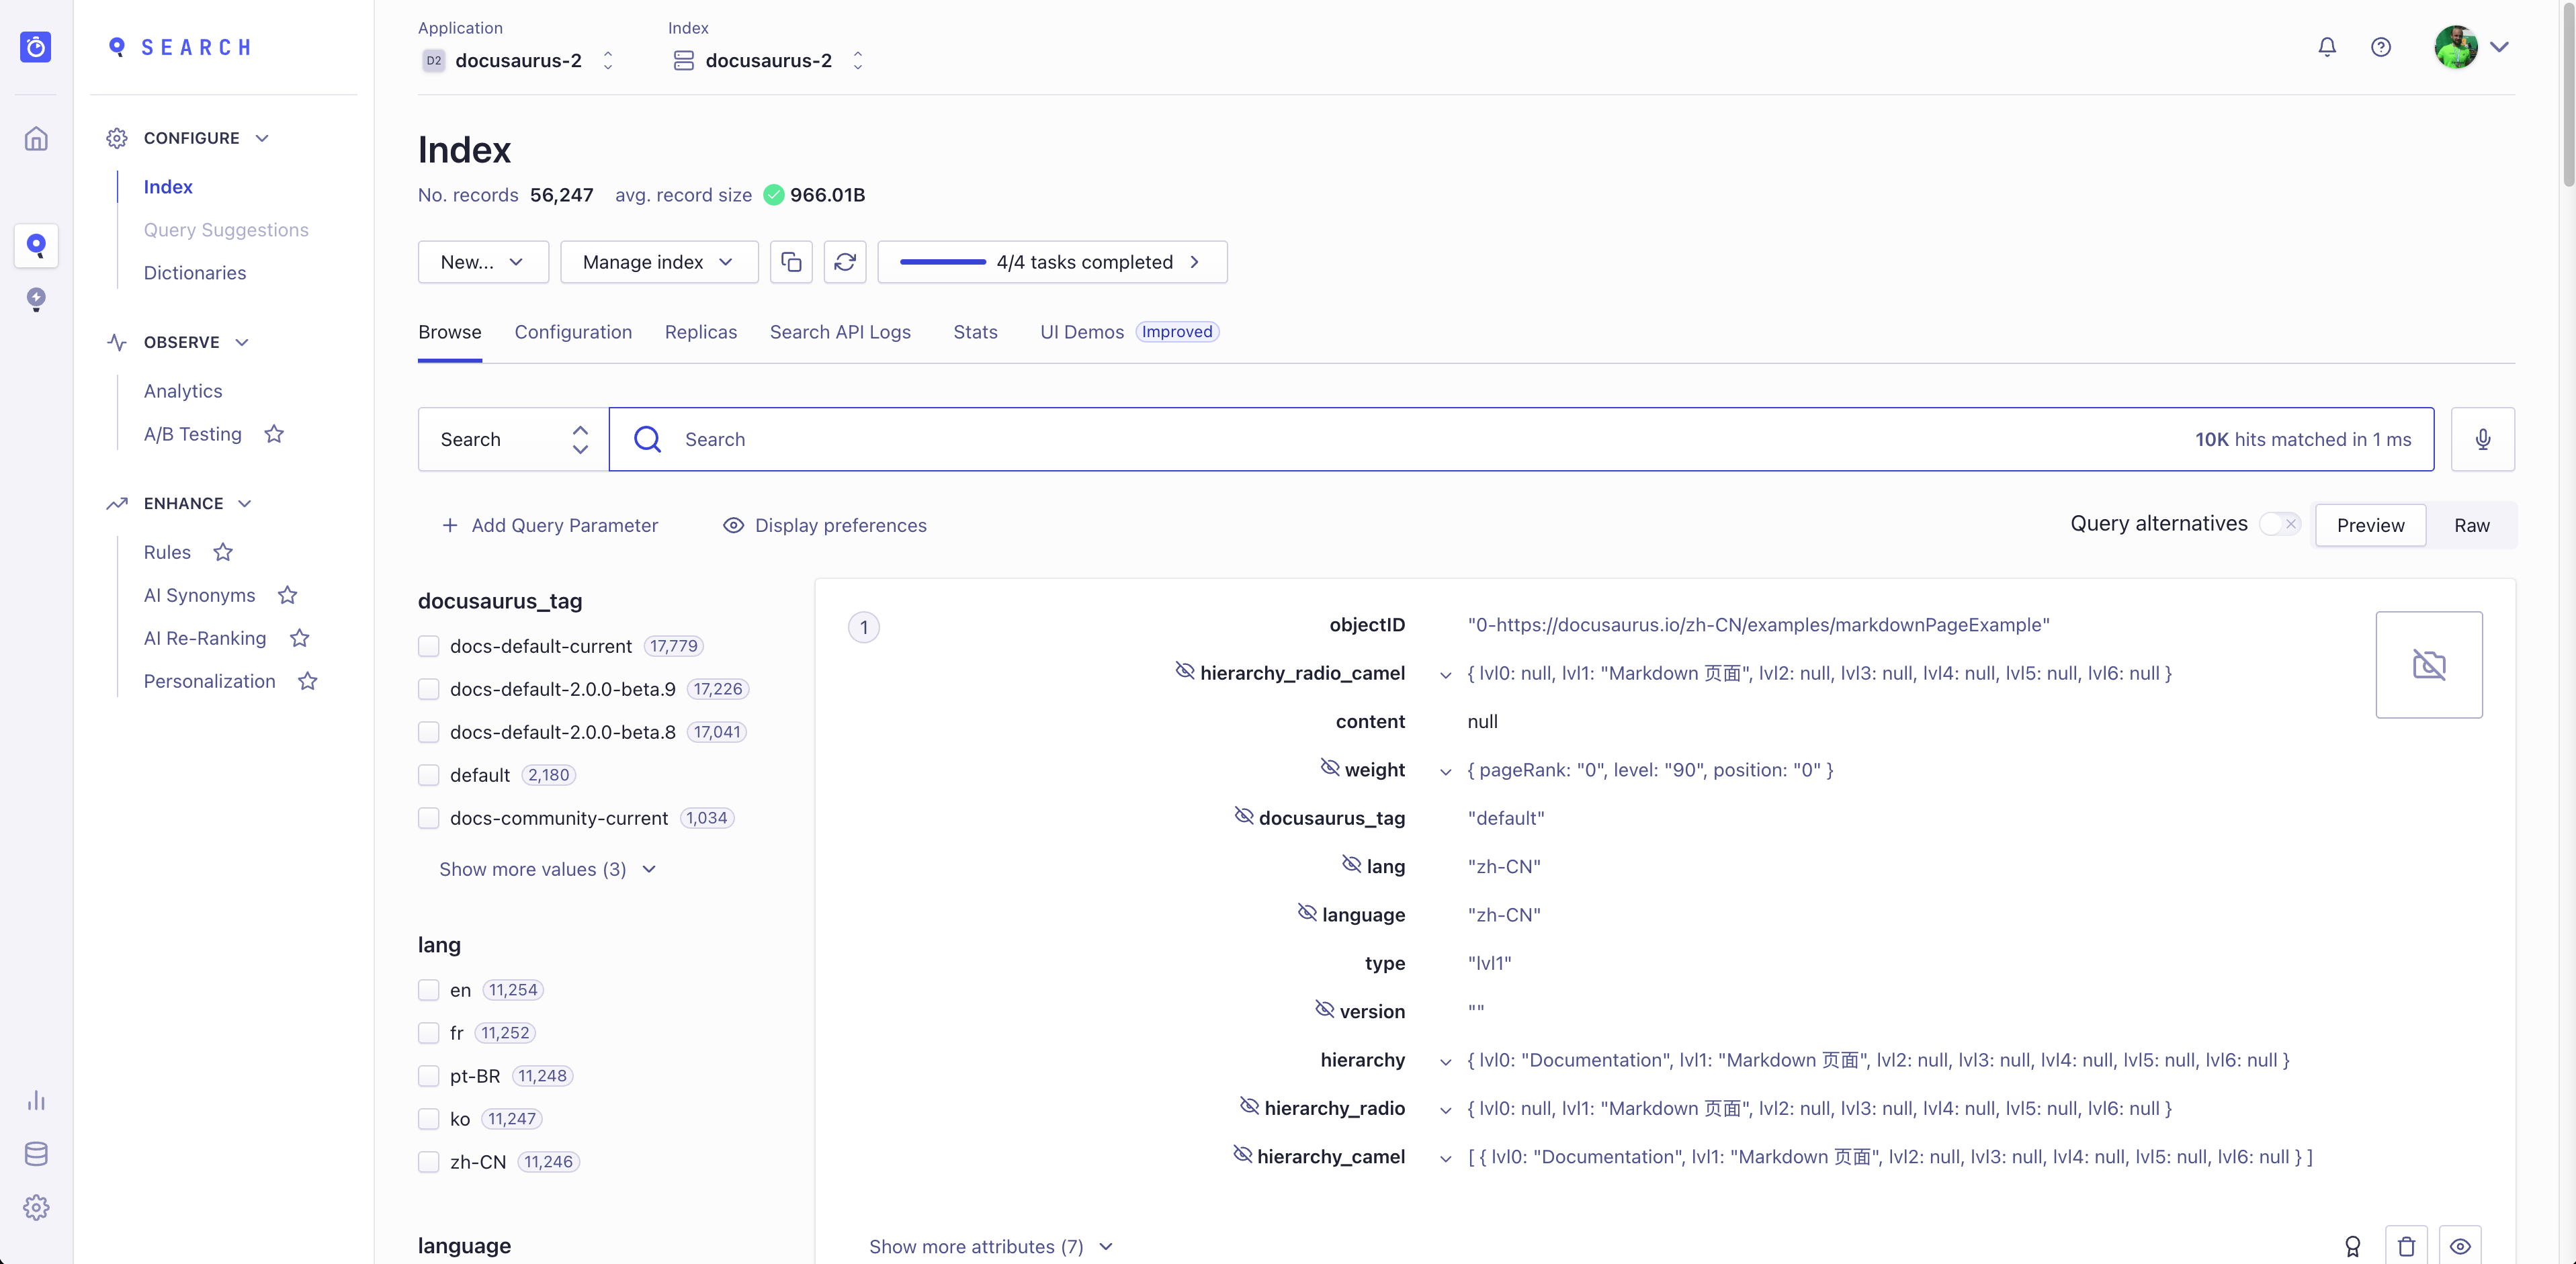 The Algolia index overview page, showing various filters and the details of every single index